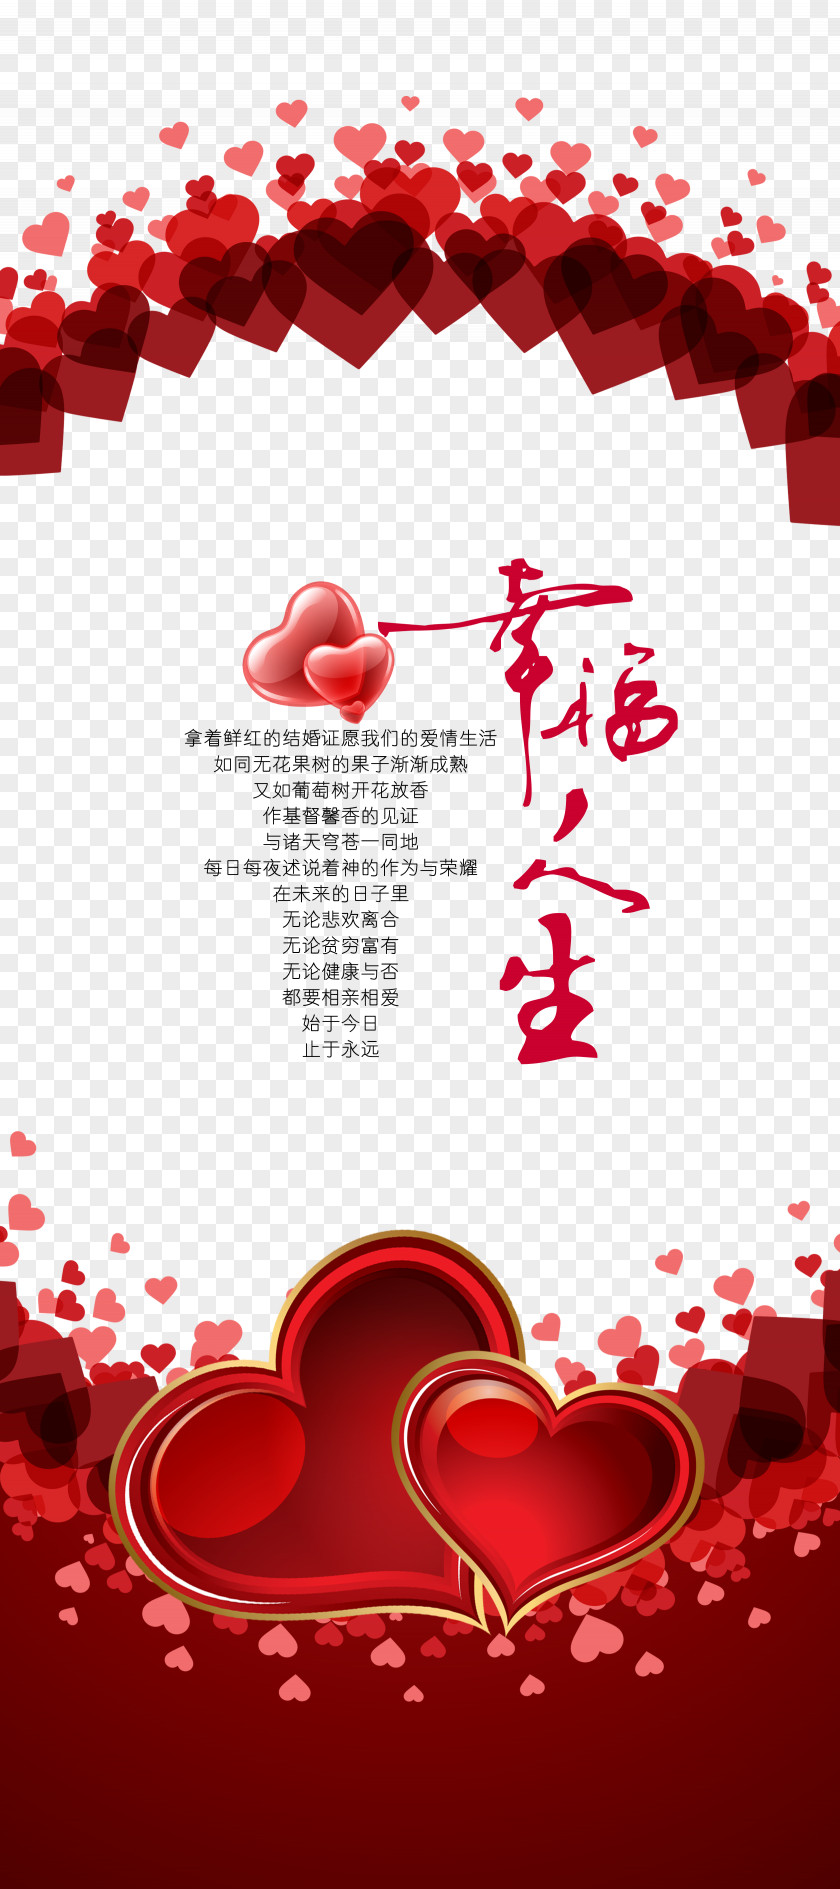 Wedding Chin Poster Download PNG